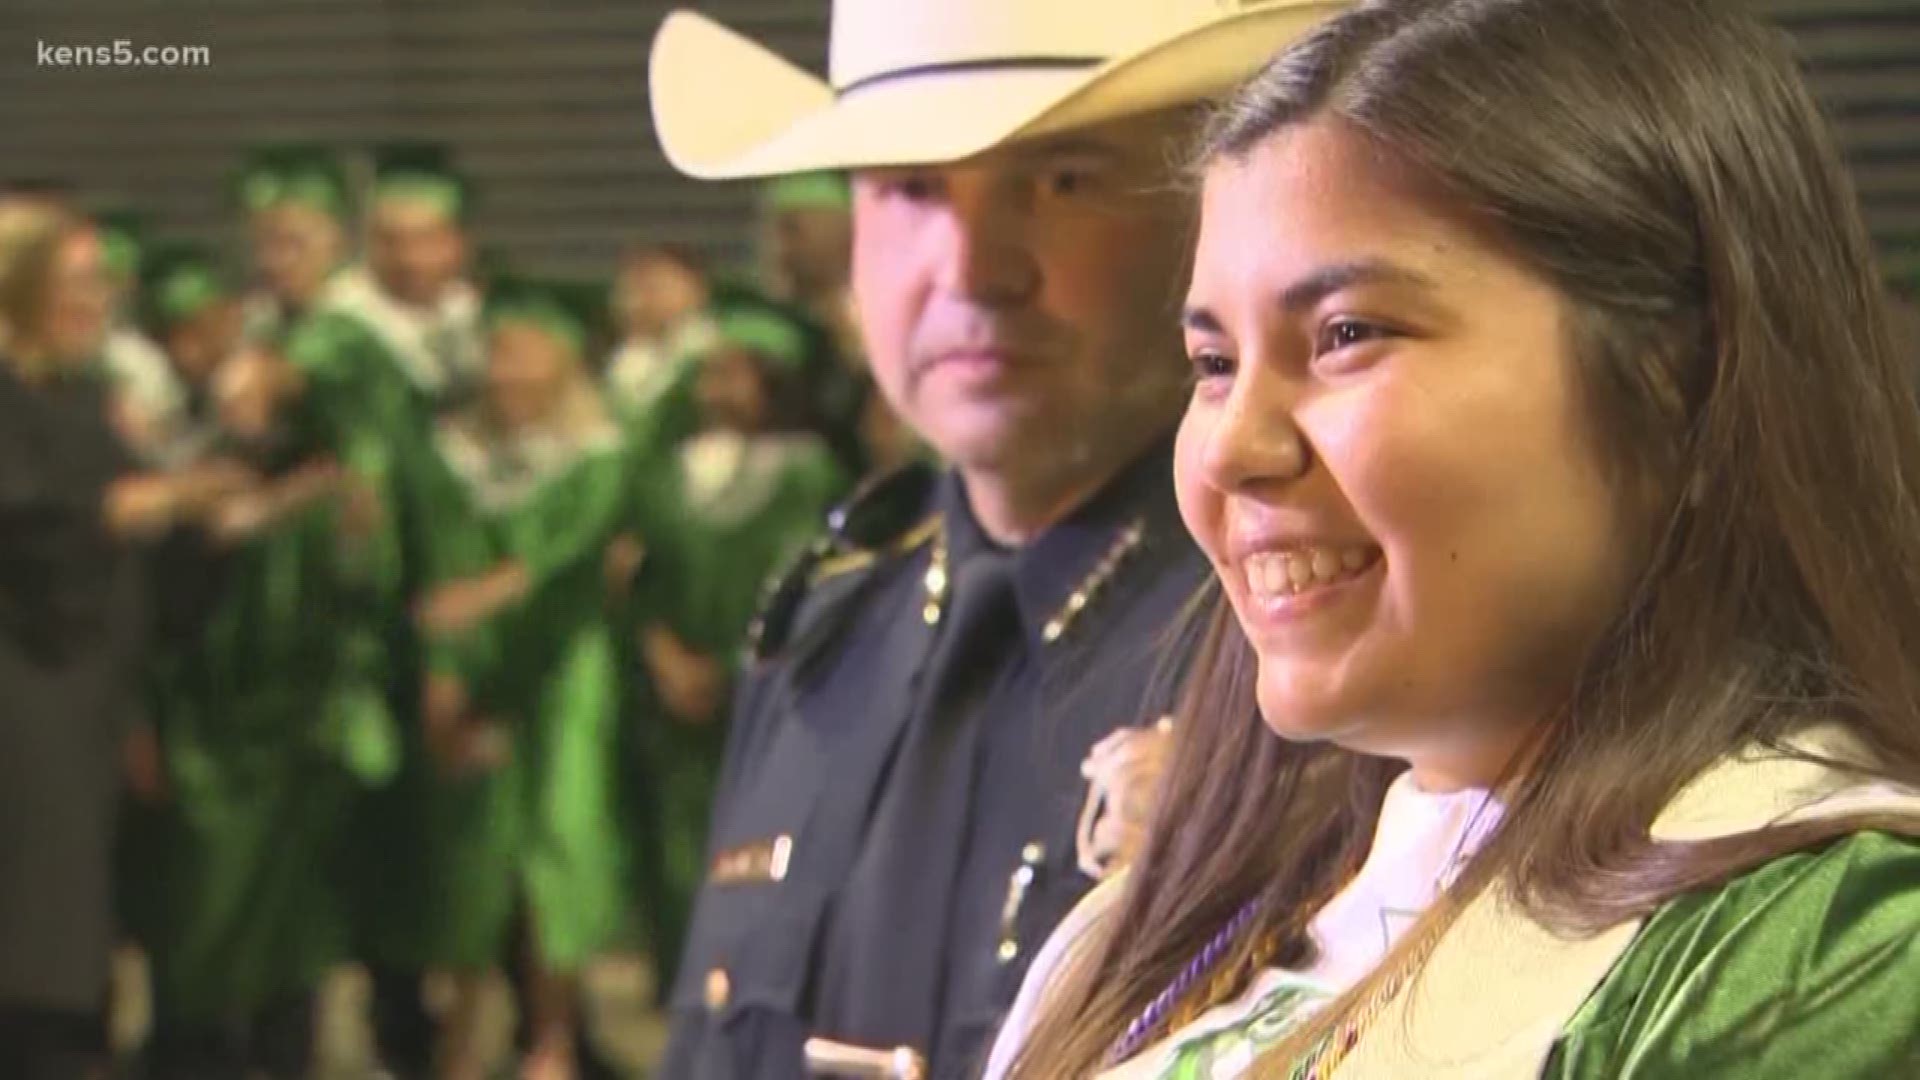 Gloria Garza's father, a Bexar County sheriff's deputy, died 15 years ago. To honor him, 100 peace officers escorted her to her high school graduation ceremony.